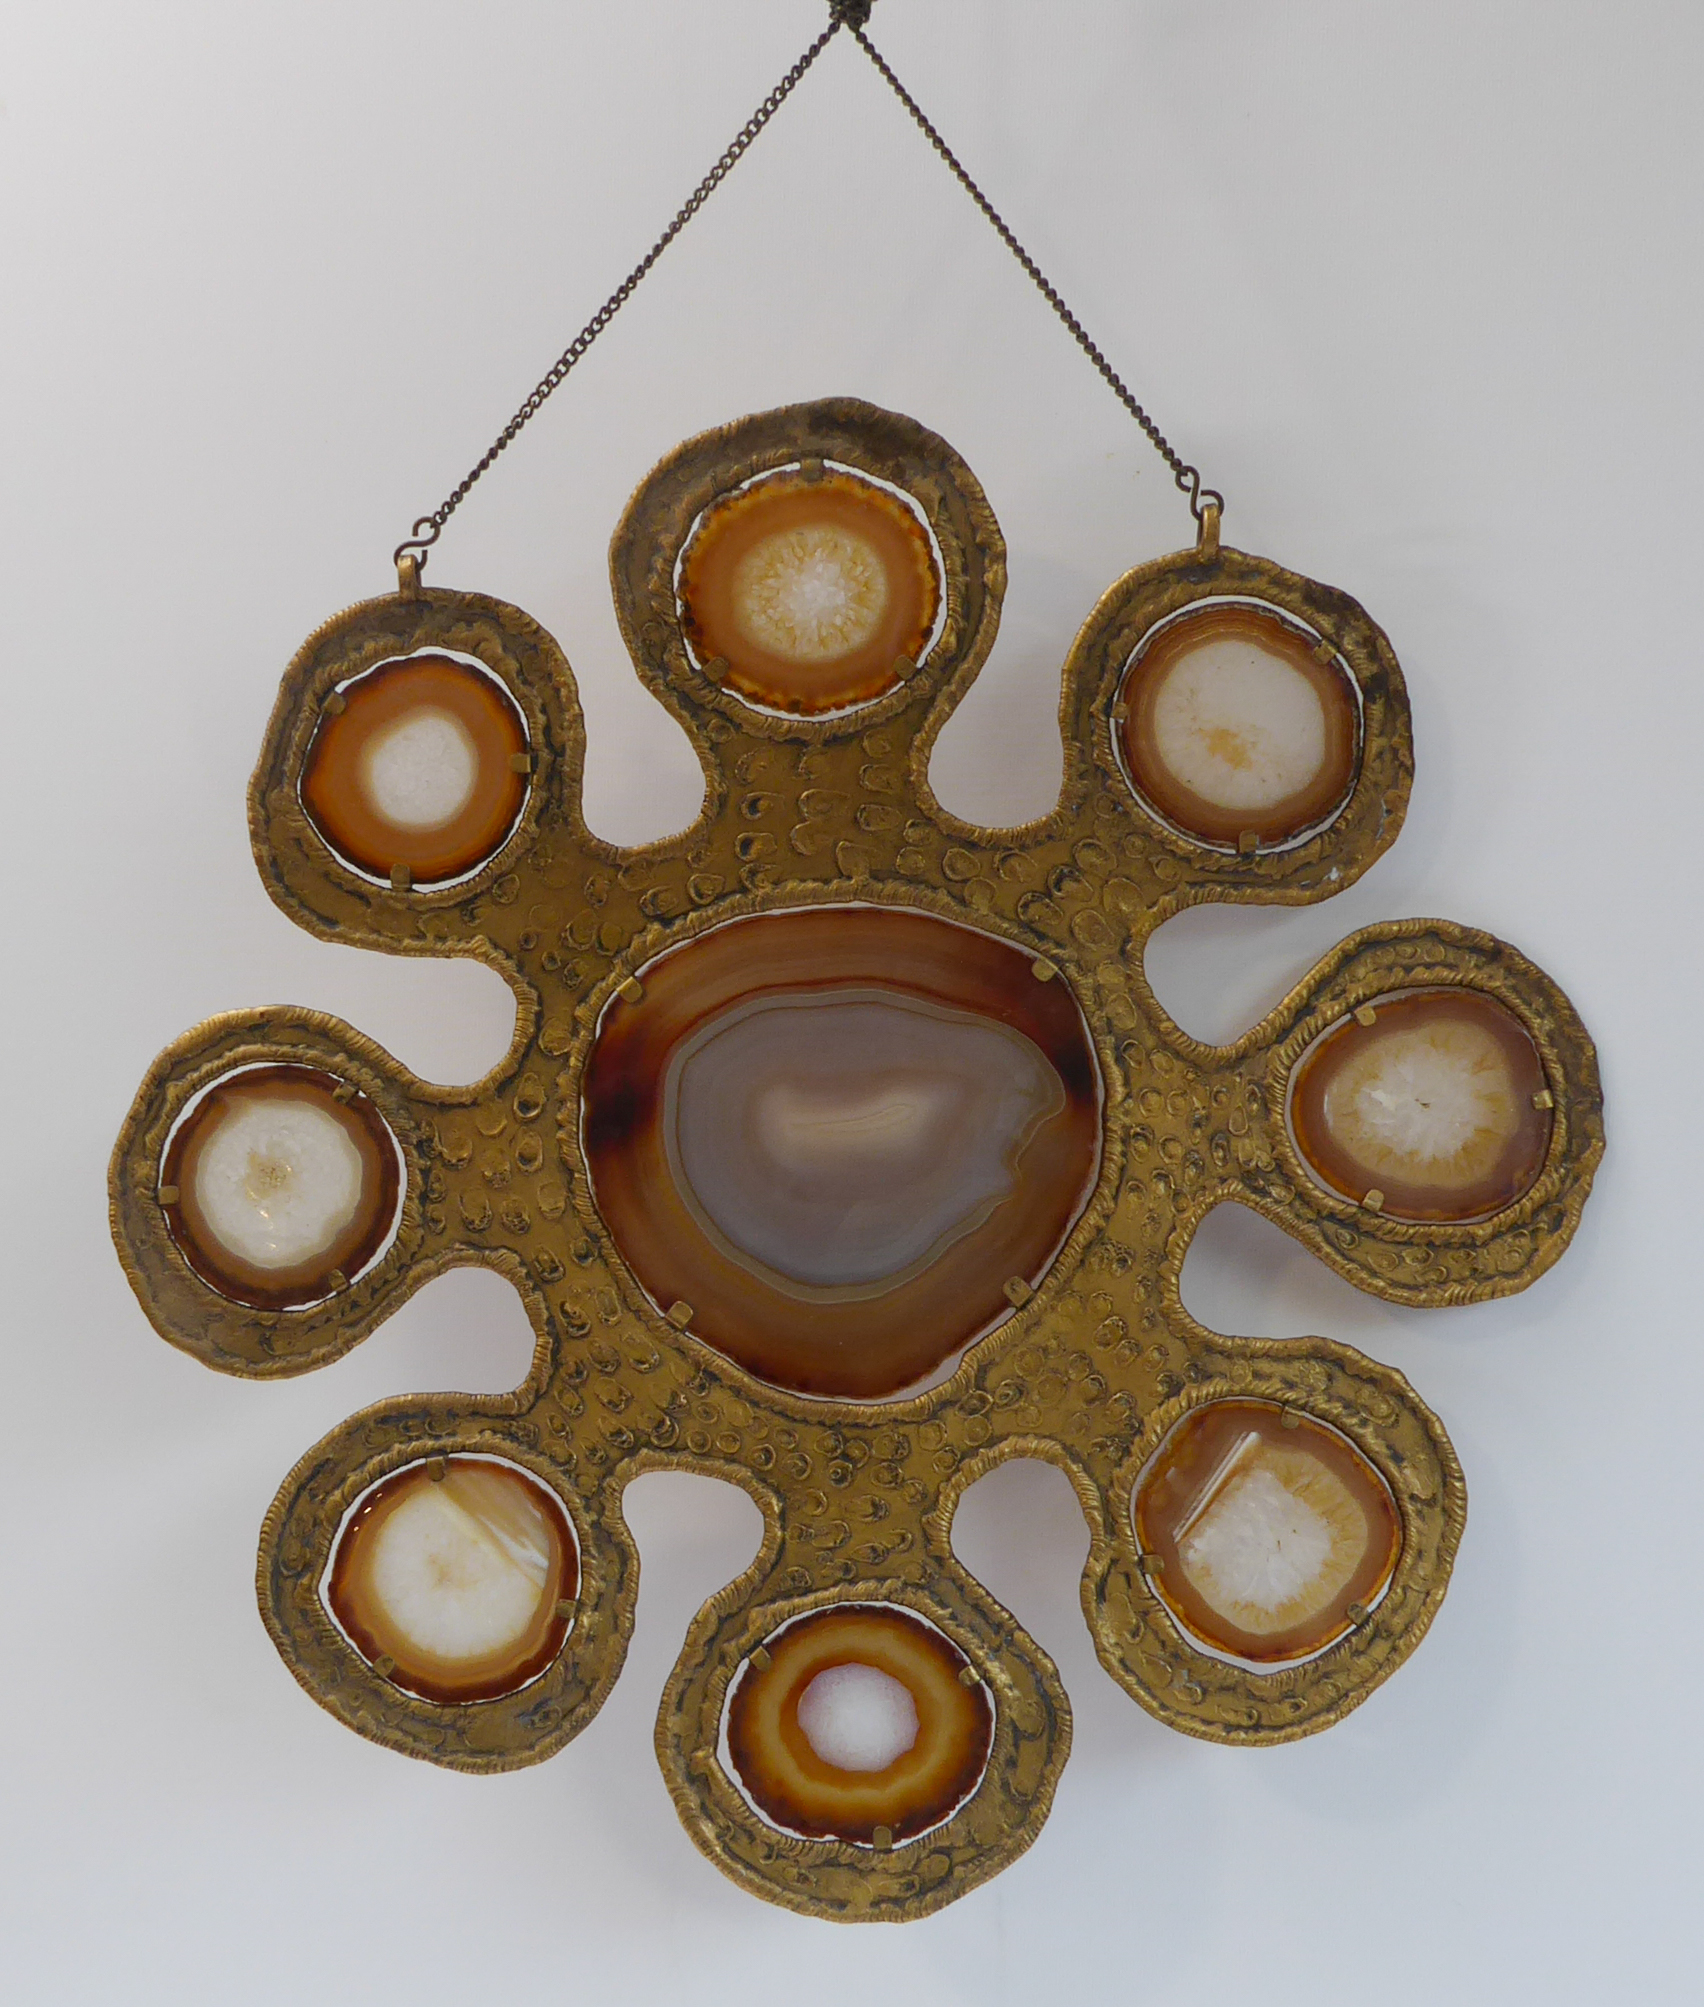 A 1970s gilt-metal hanging mobile, set with a large central agate panel surrounded by eight